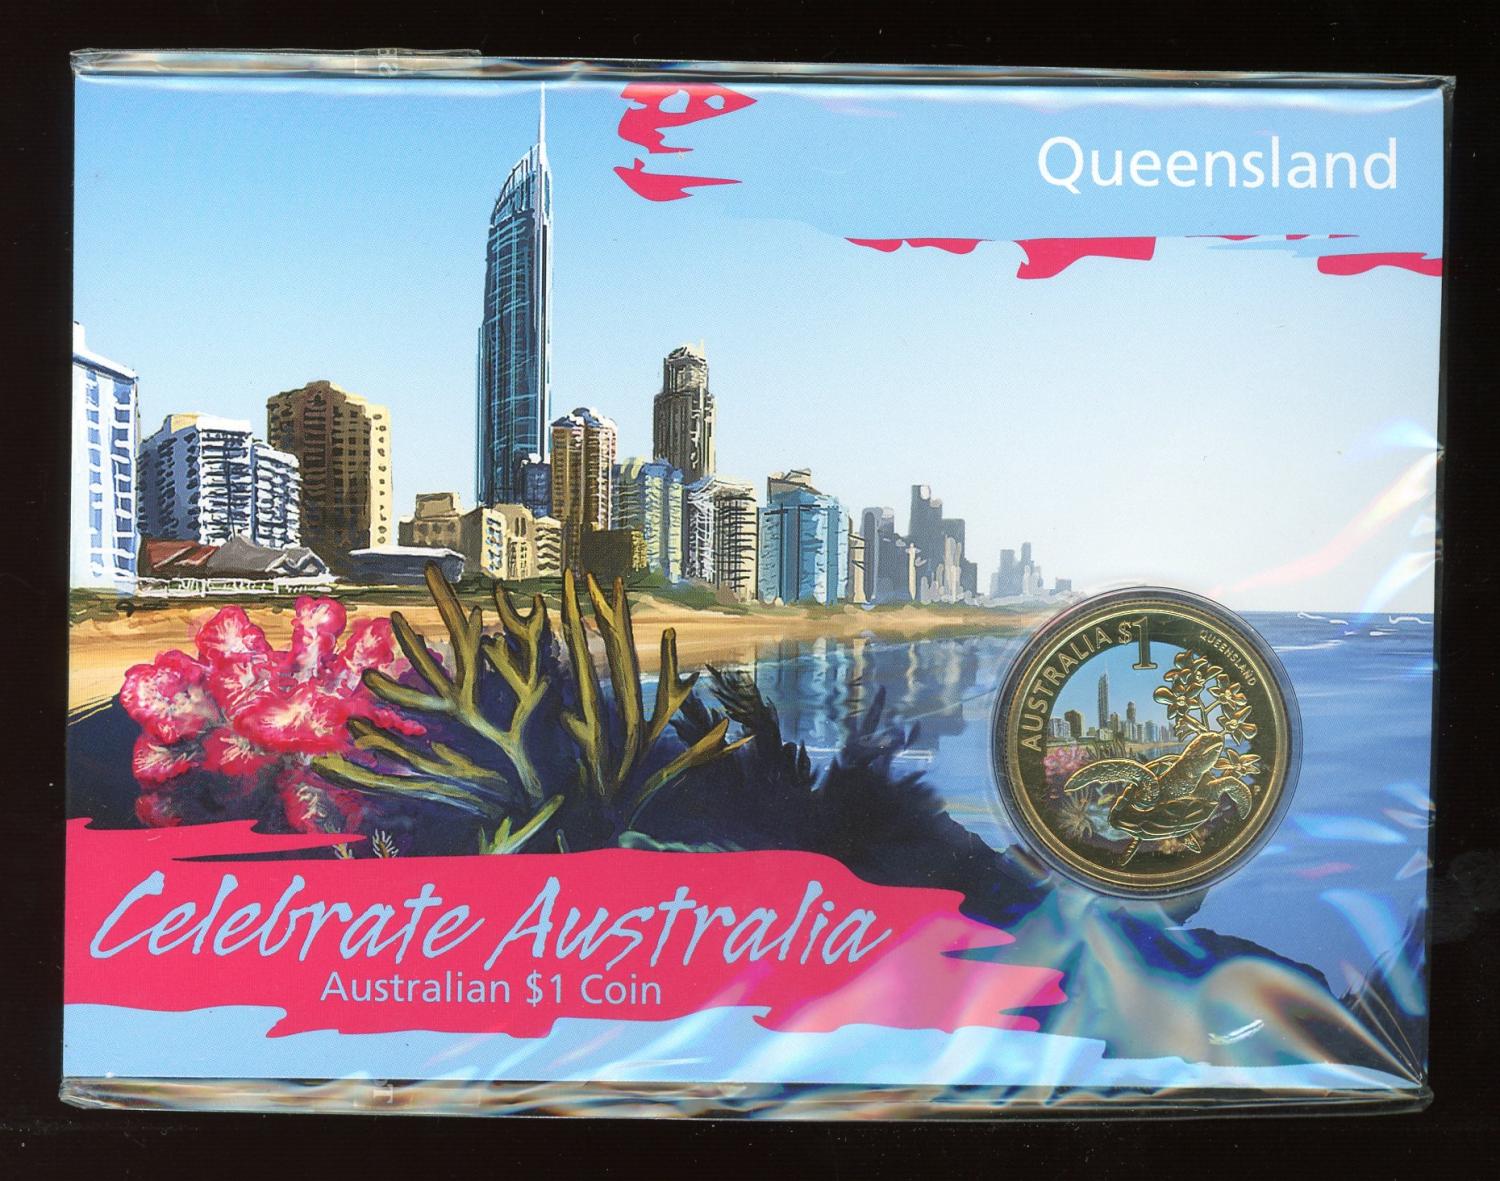 Thumbnail for 2009 Celebrate Australia Coloured Uncirculated $1 Coin - Queensland